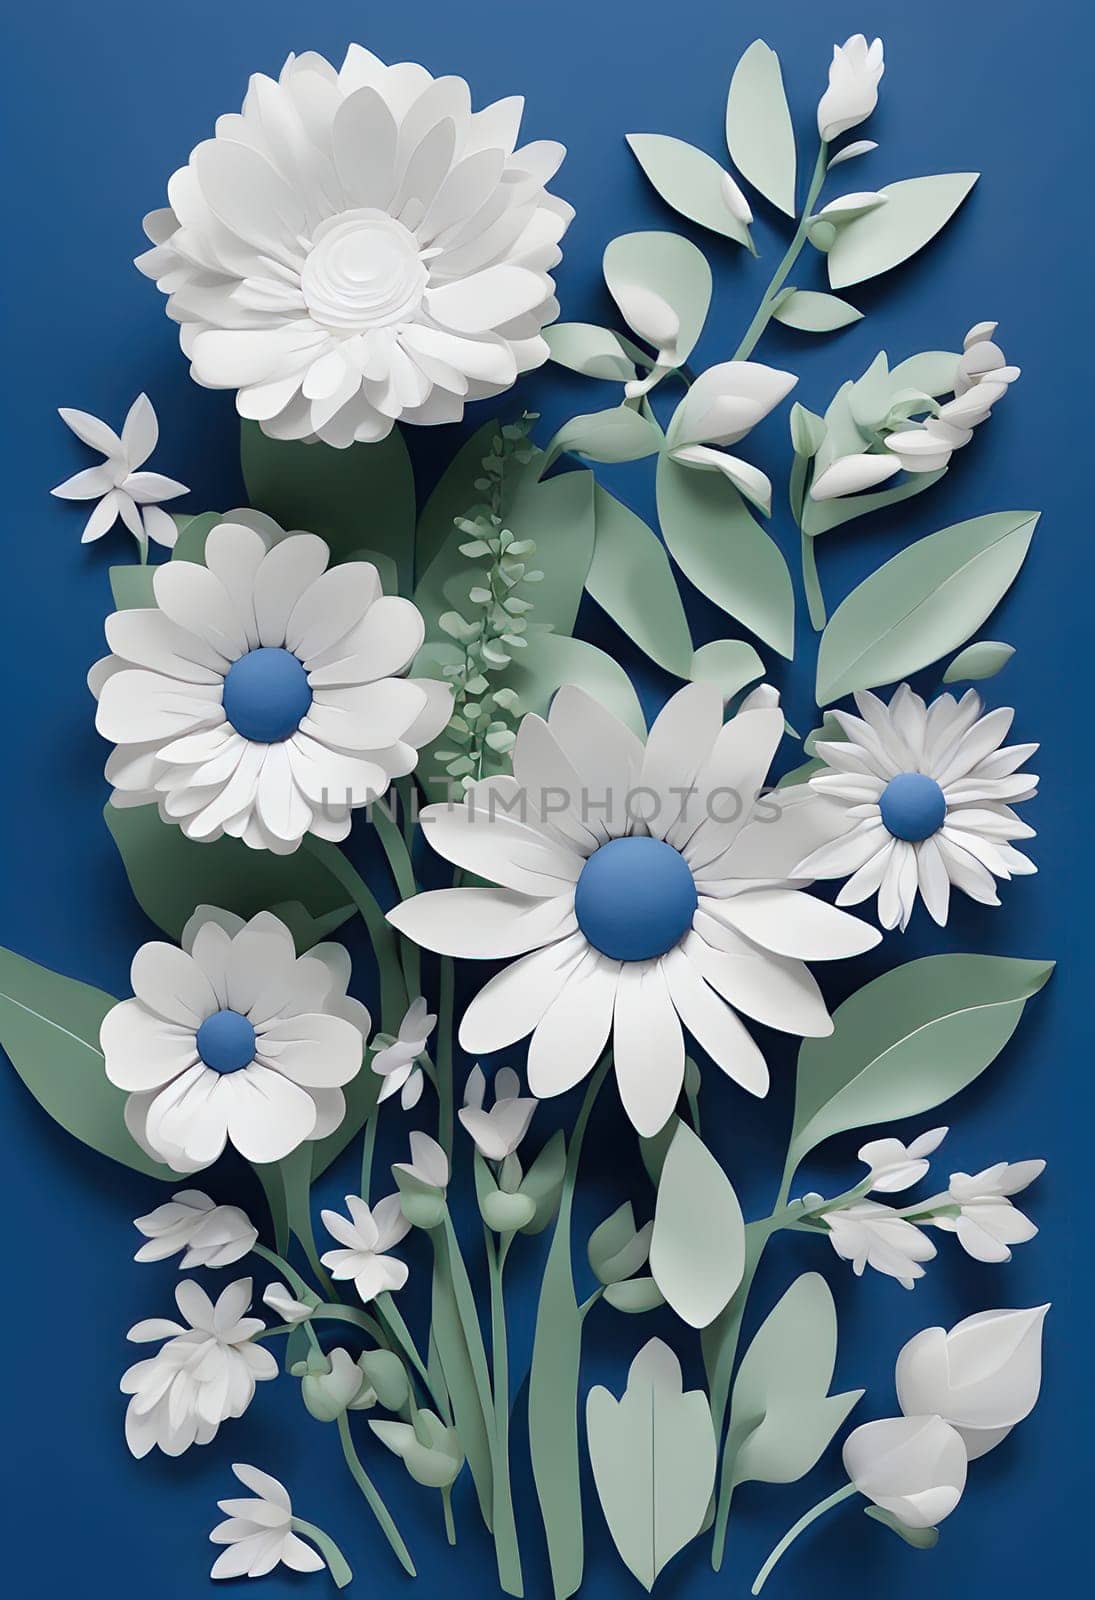 The image shows a 3D painting of white and blue flowers on a blue background. The flowers are of different sizes and shapes and are surrounded by green leaves. by rostik924